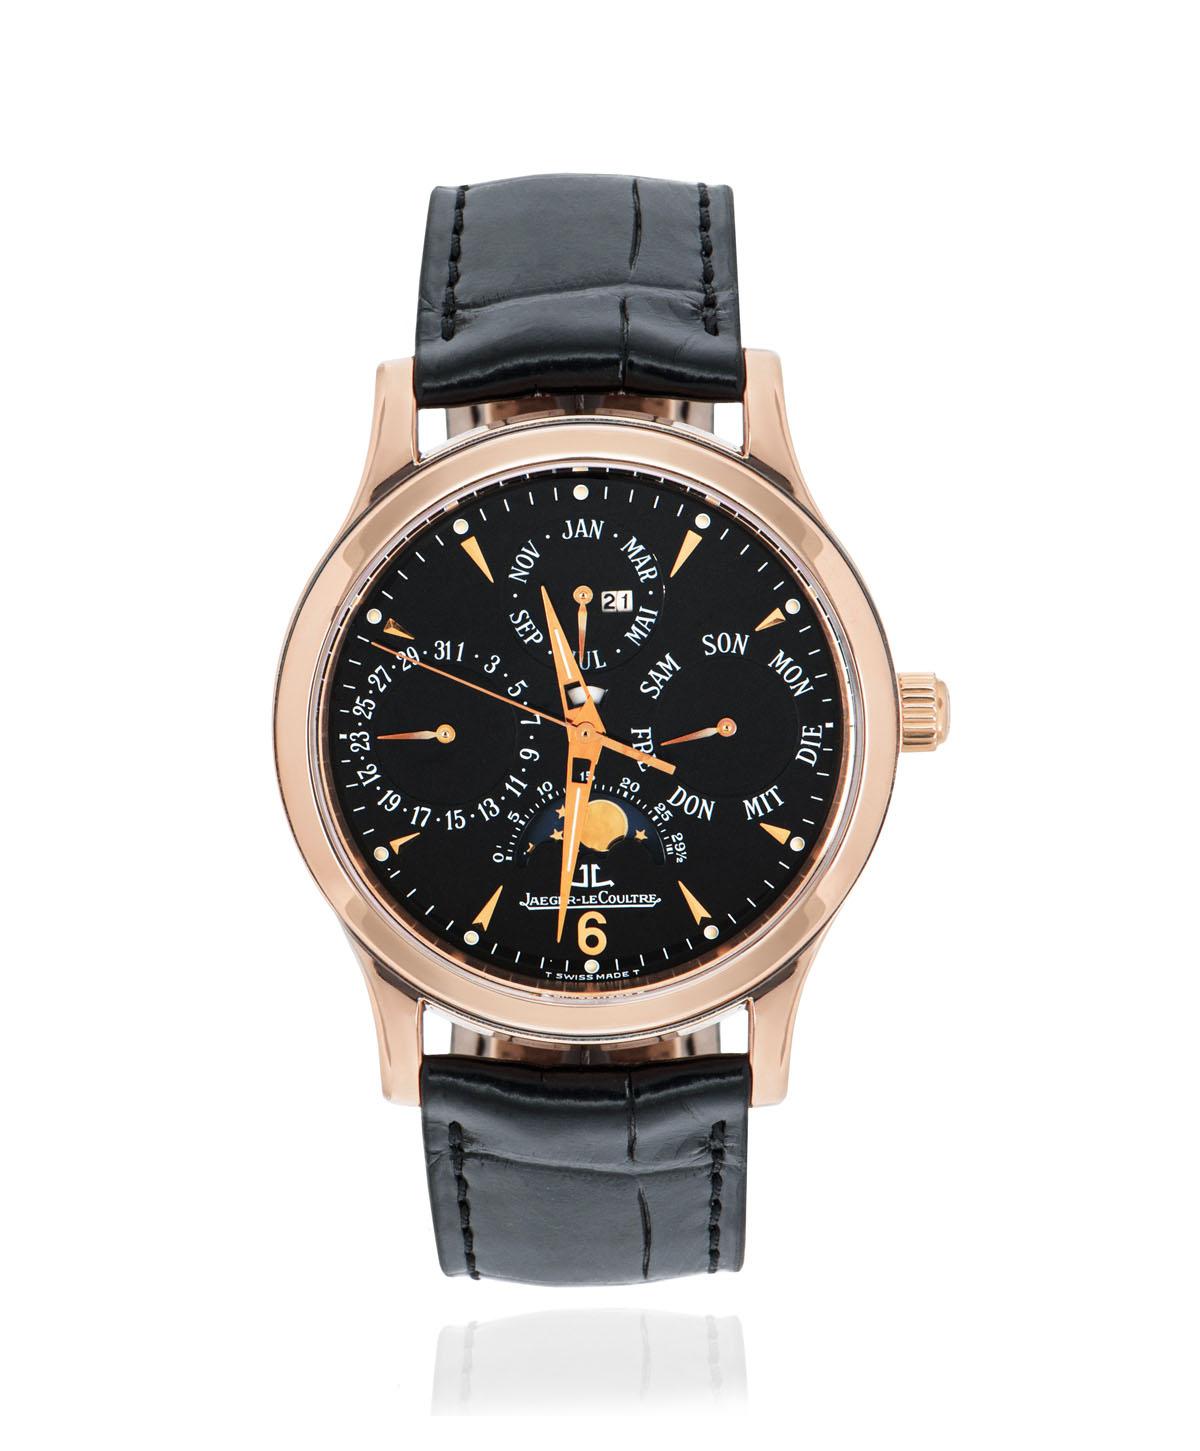 A 37 mm Master Control Perpetual Calendar in rose gold by Jaeger LeCoultre. Features a black dial with displays of the moon phases, the day, the date, month and year. Just above the centre of the dial is a day/night indicator.

An original brand new